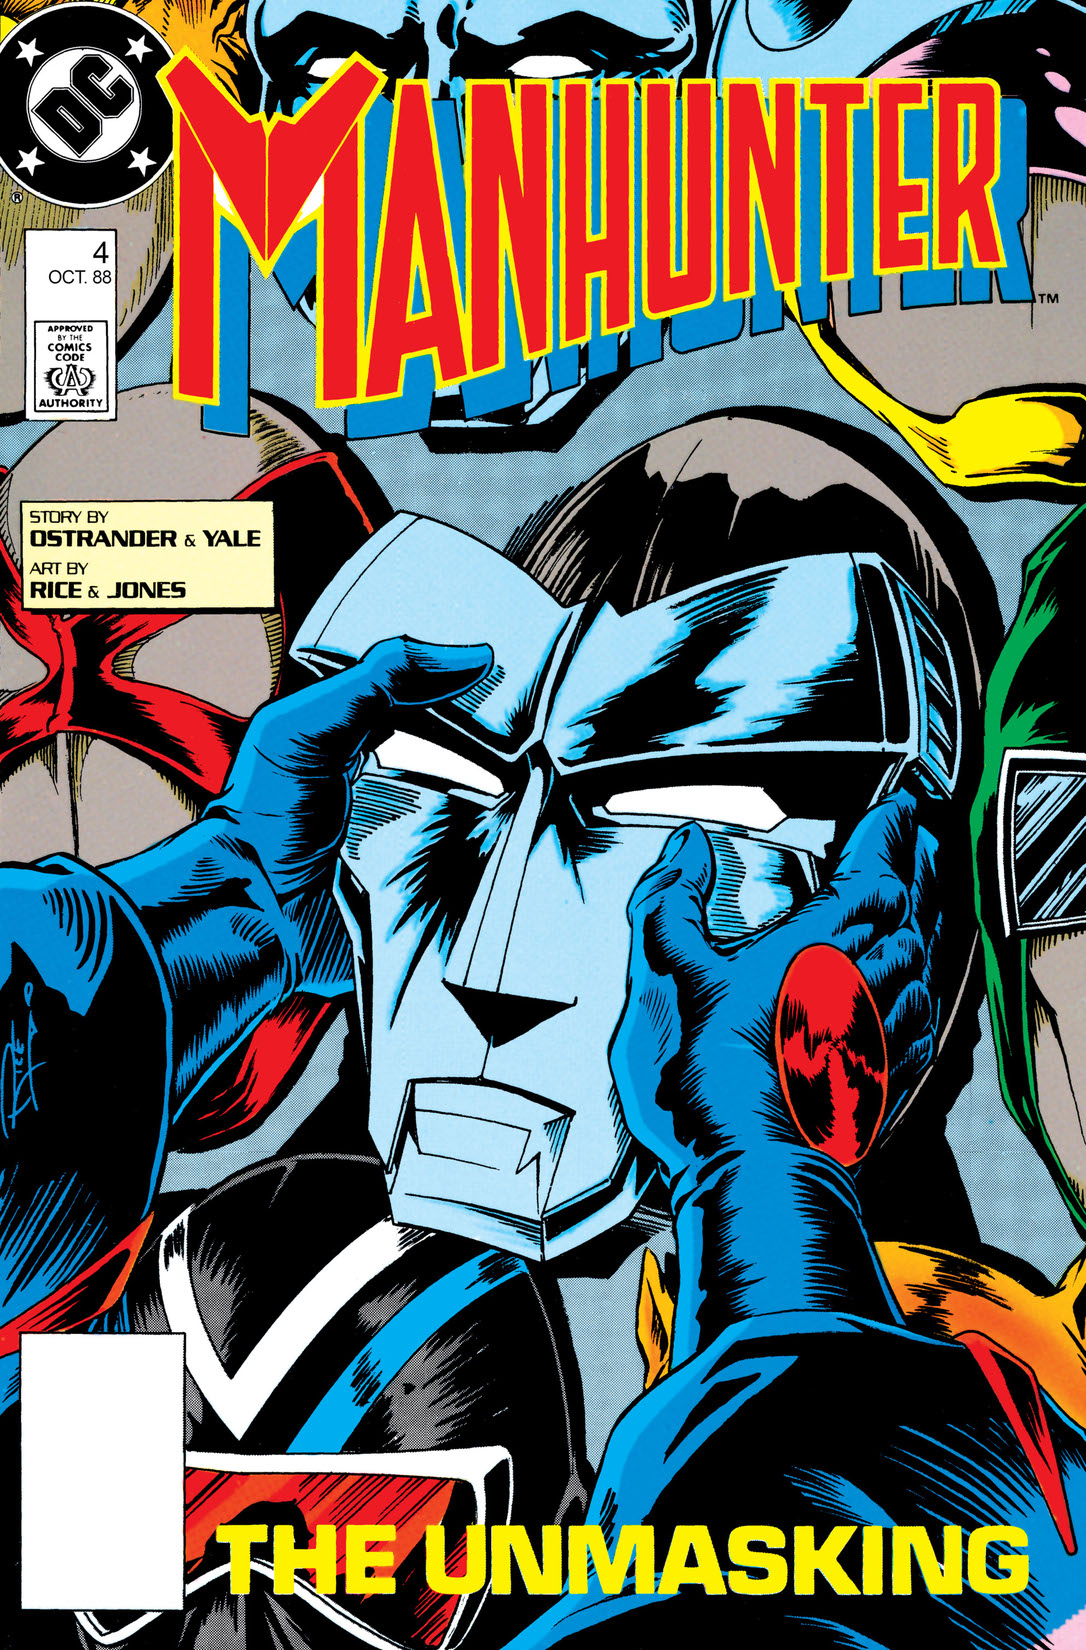 Manhunter (1988-) #4 preview images